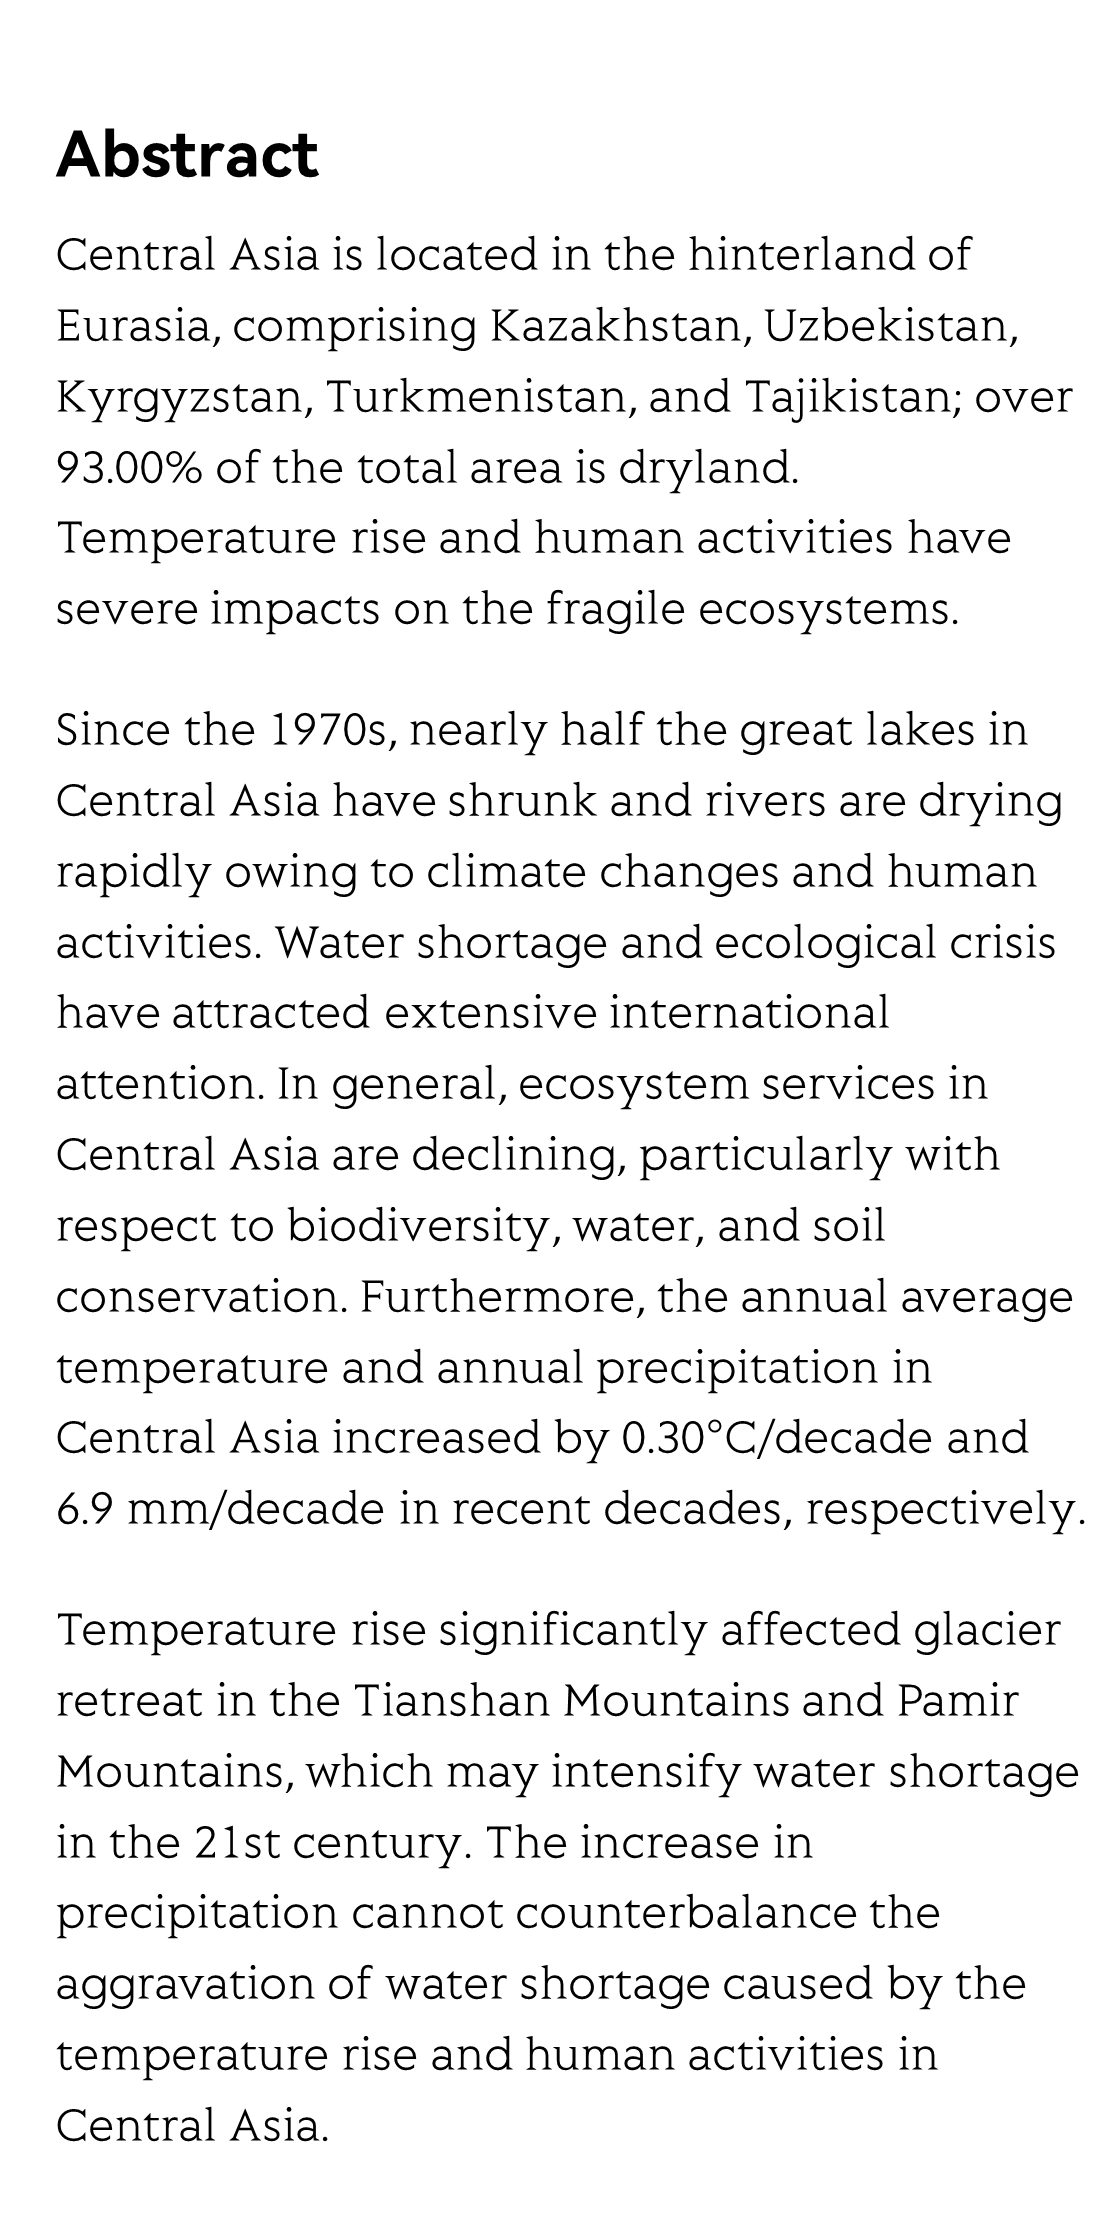 Spatiotemporal changes in water, land use, and ecosystem services in Central Asia considering climate changes and human activities_2